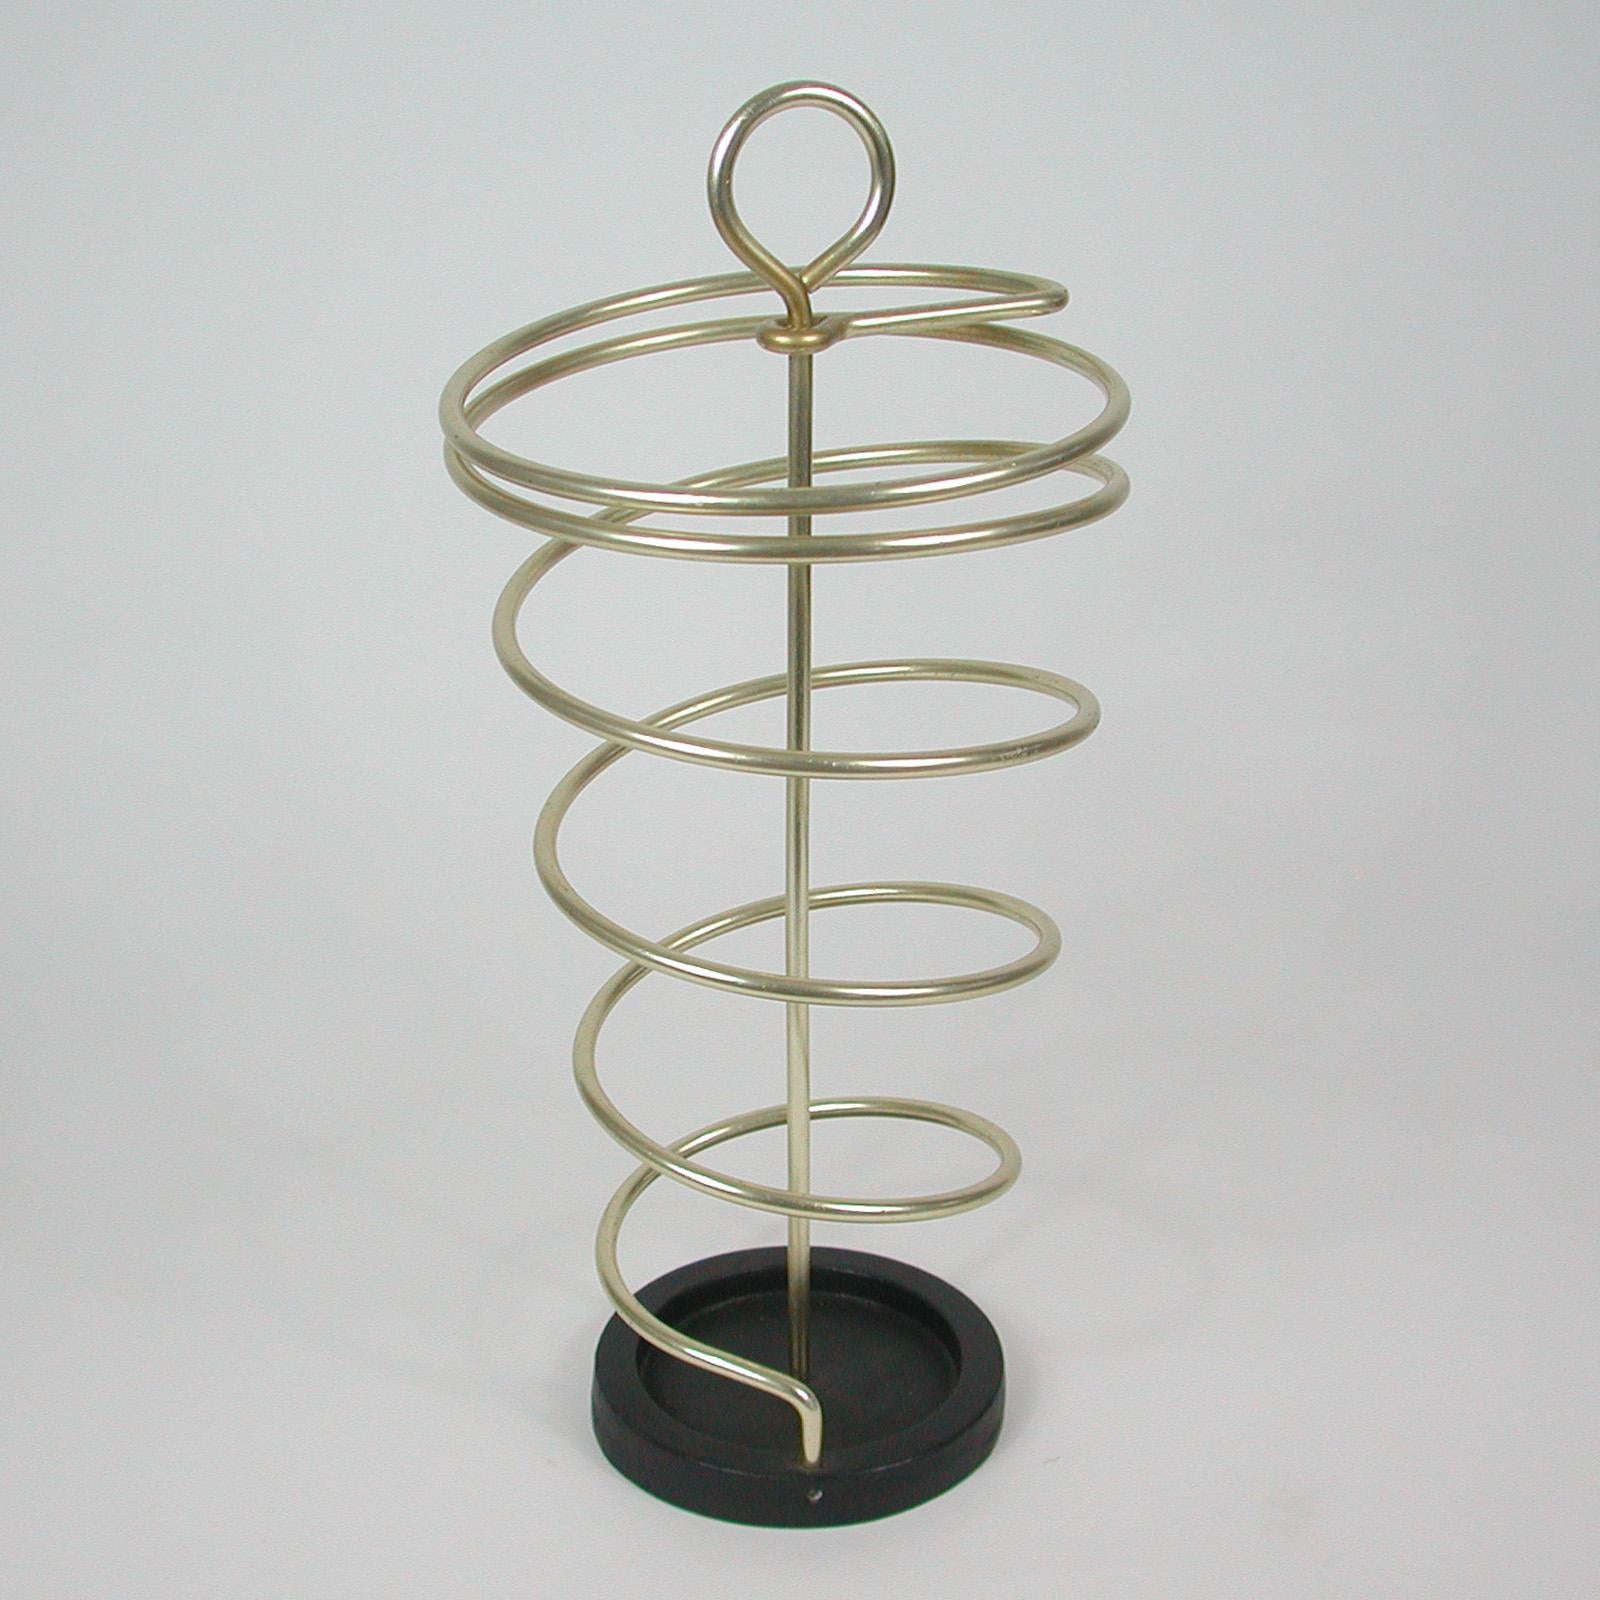 Anodized Midcentury Austrian Loop Umbrella Stand, 1950s For Sale